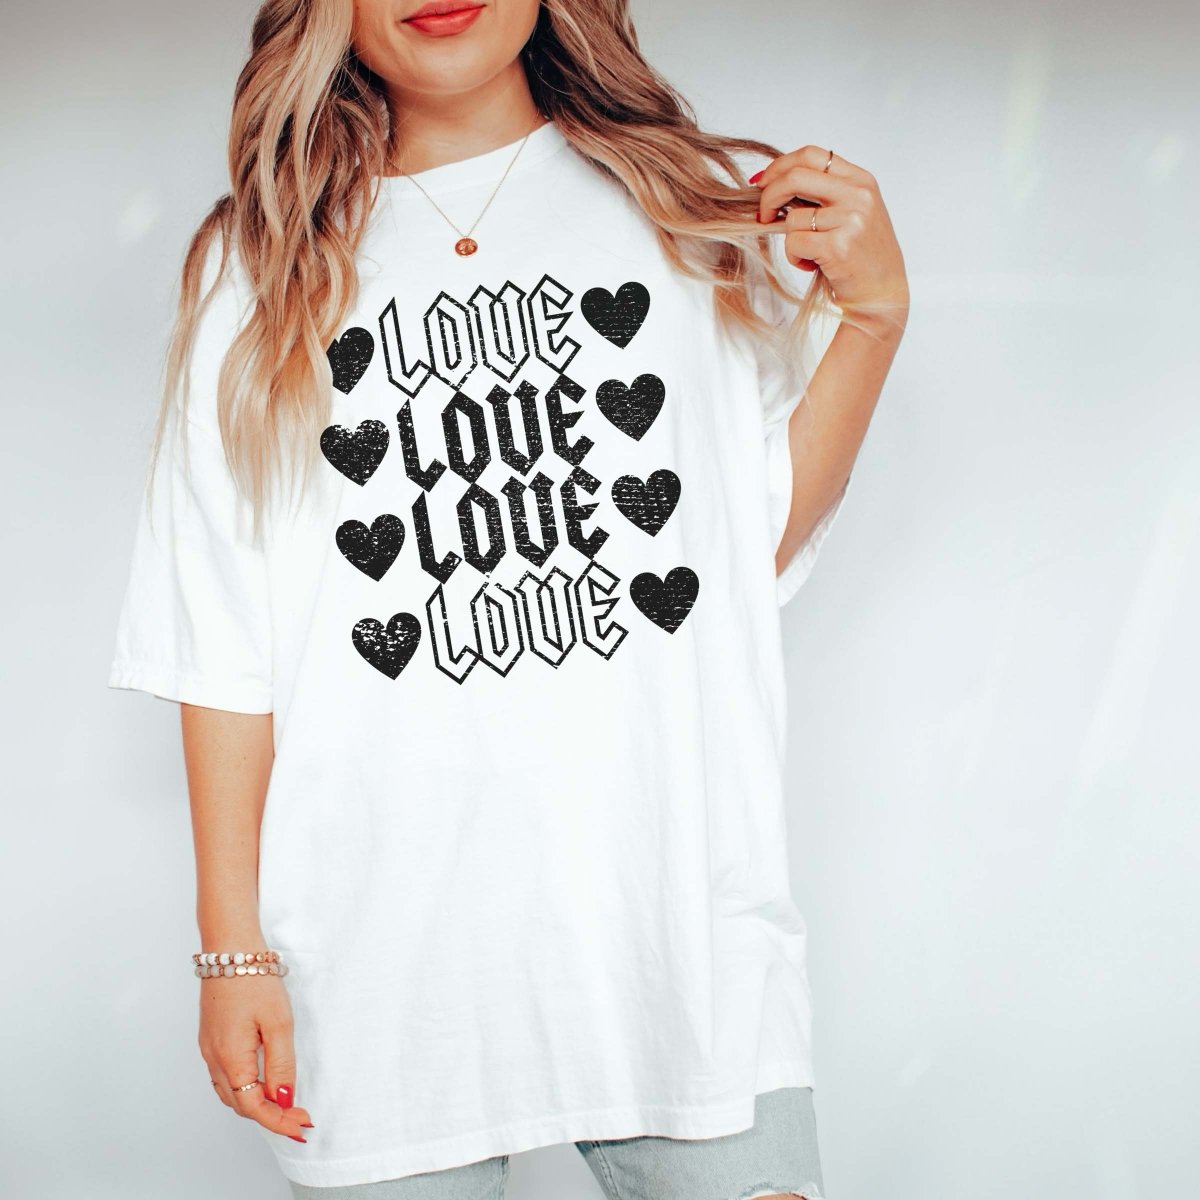 25,000+ Love Heart Print Pictures